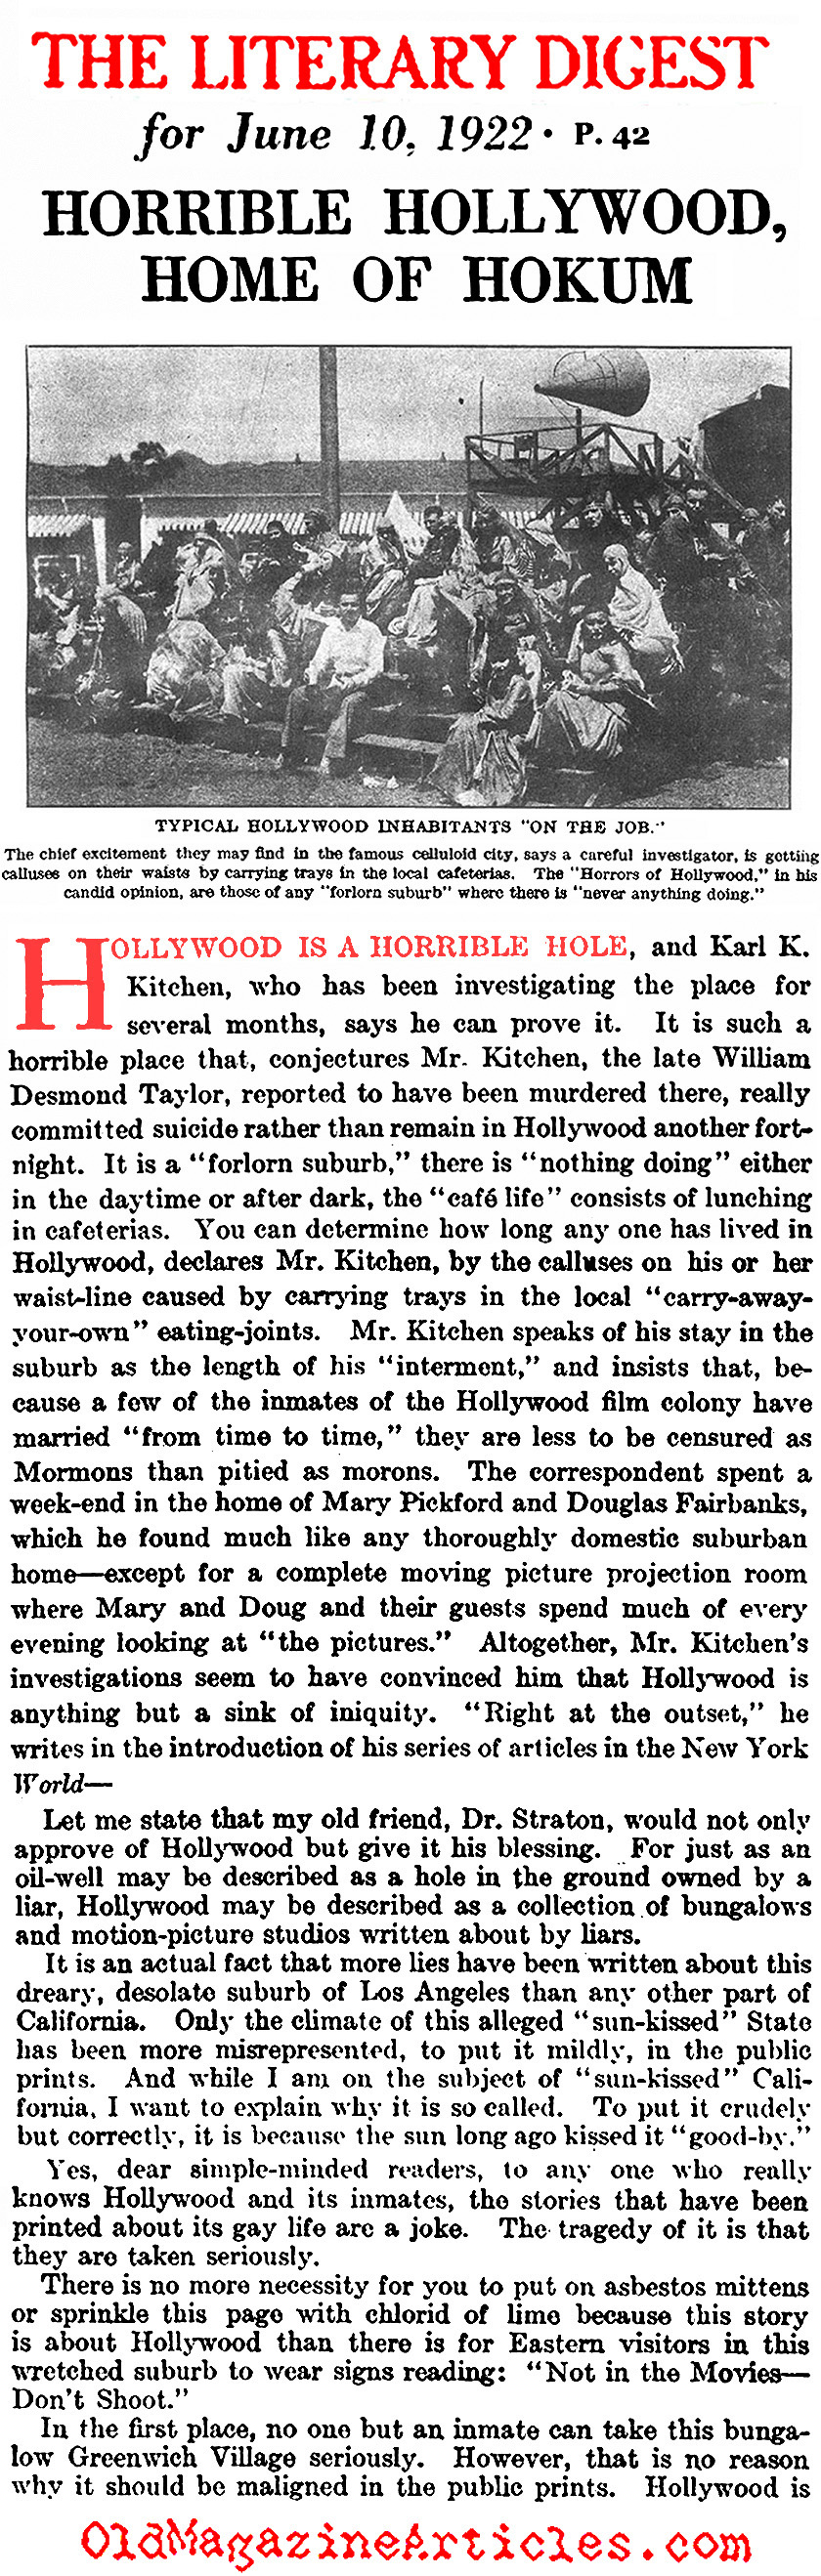 Dinner with Douglas Fairbanks and Mary Pickford  (Literary Digest, 1922)